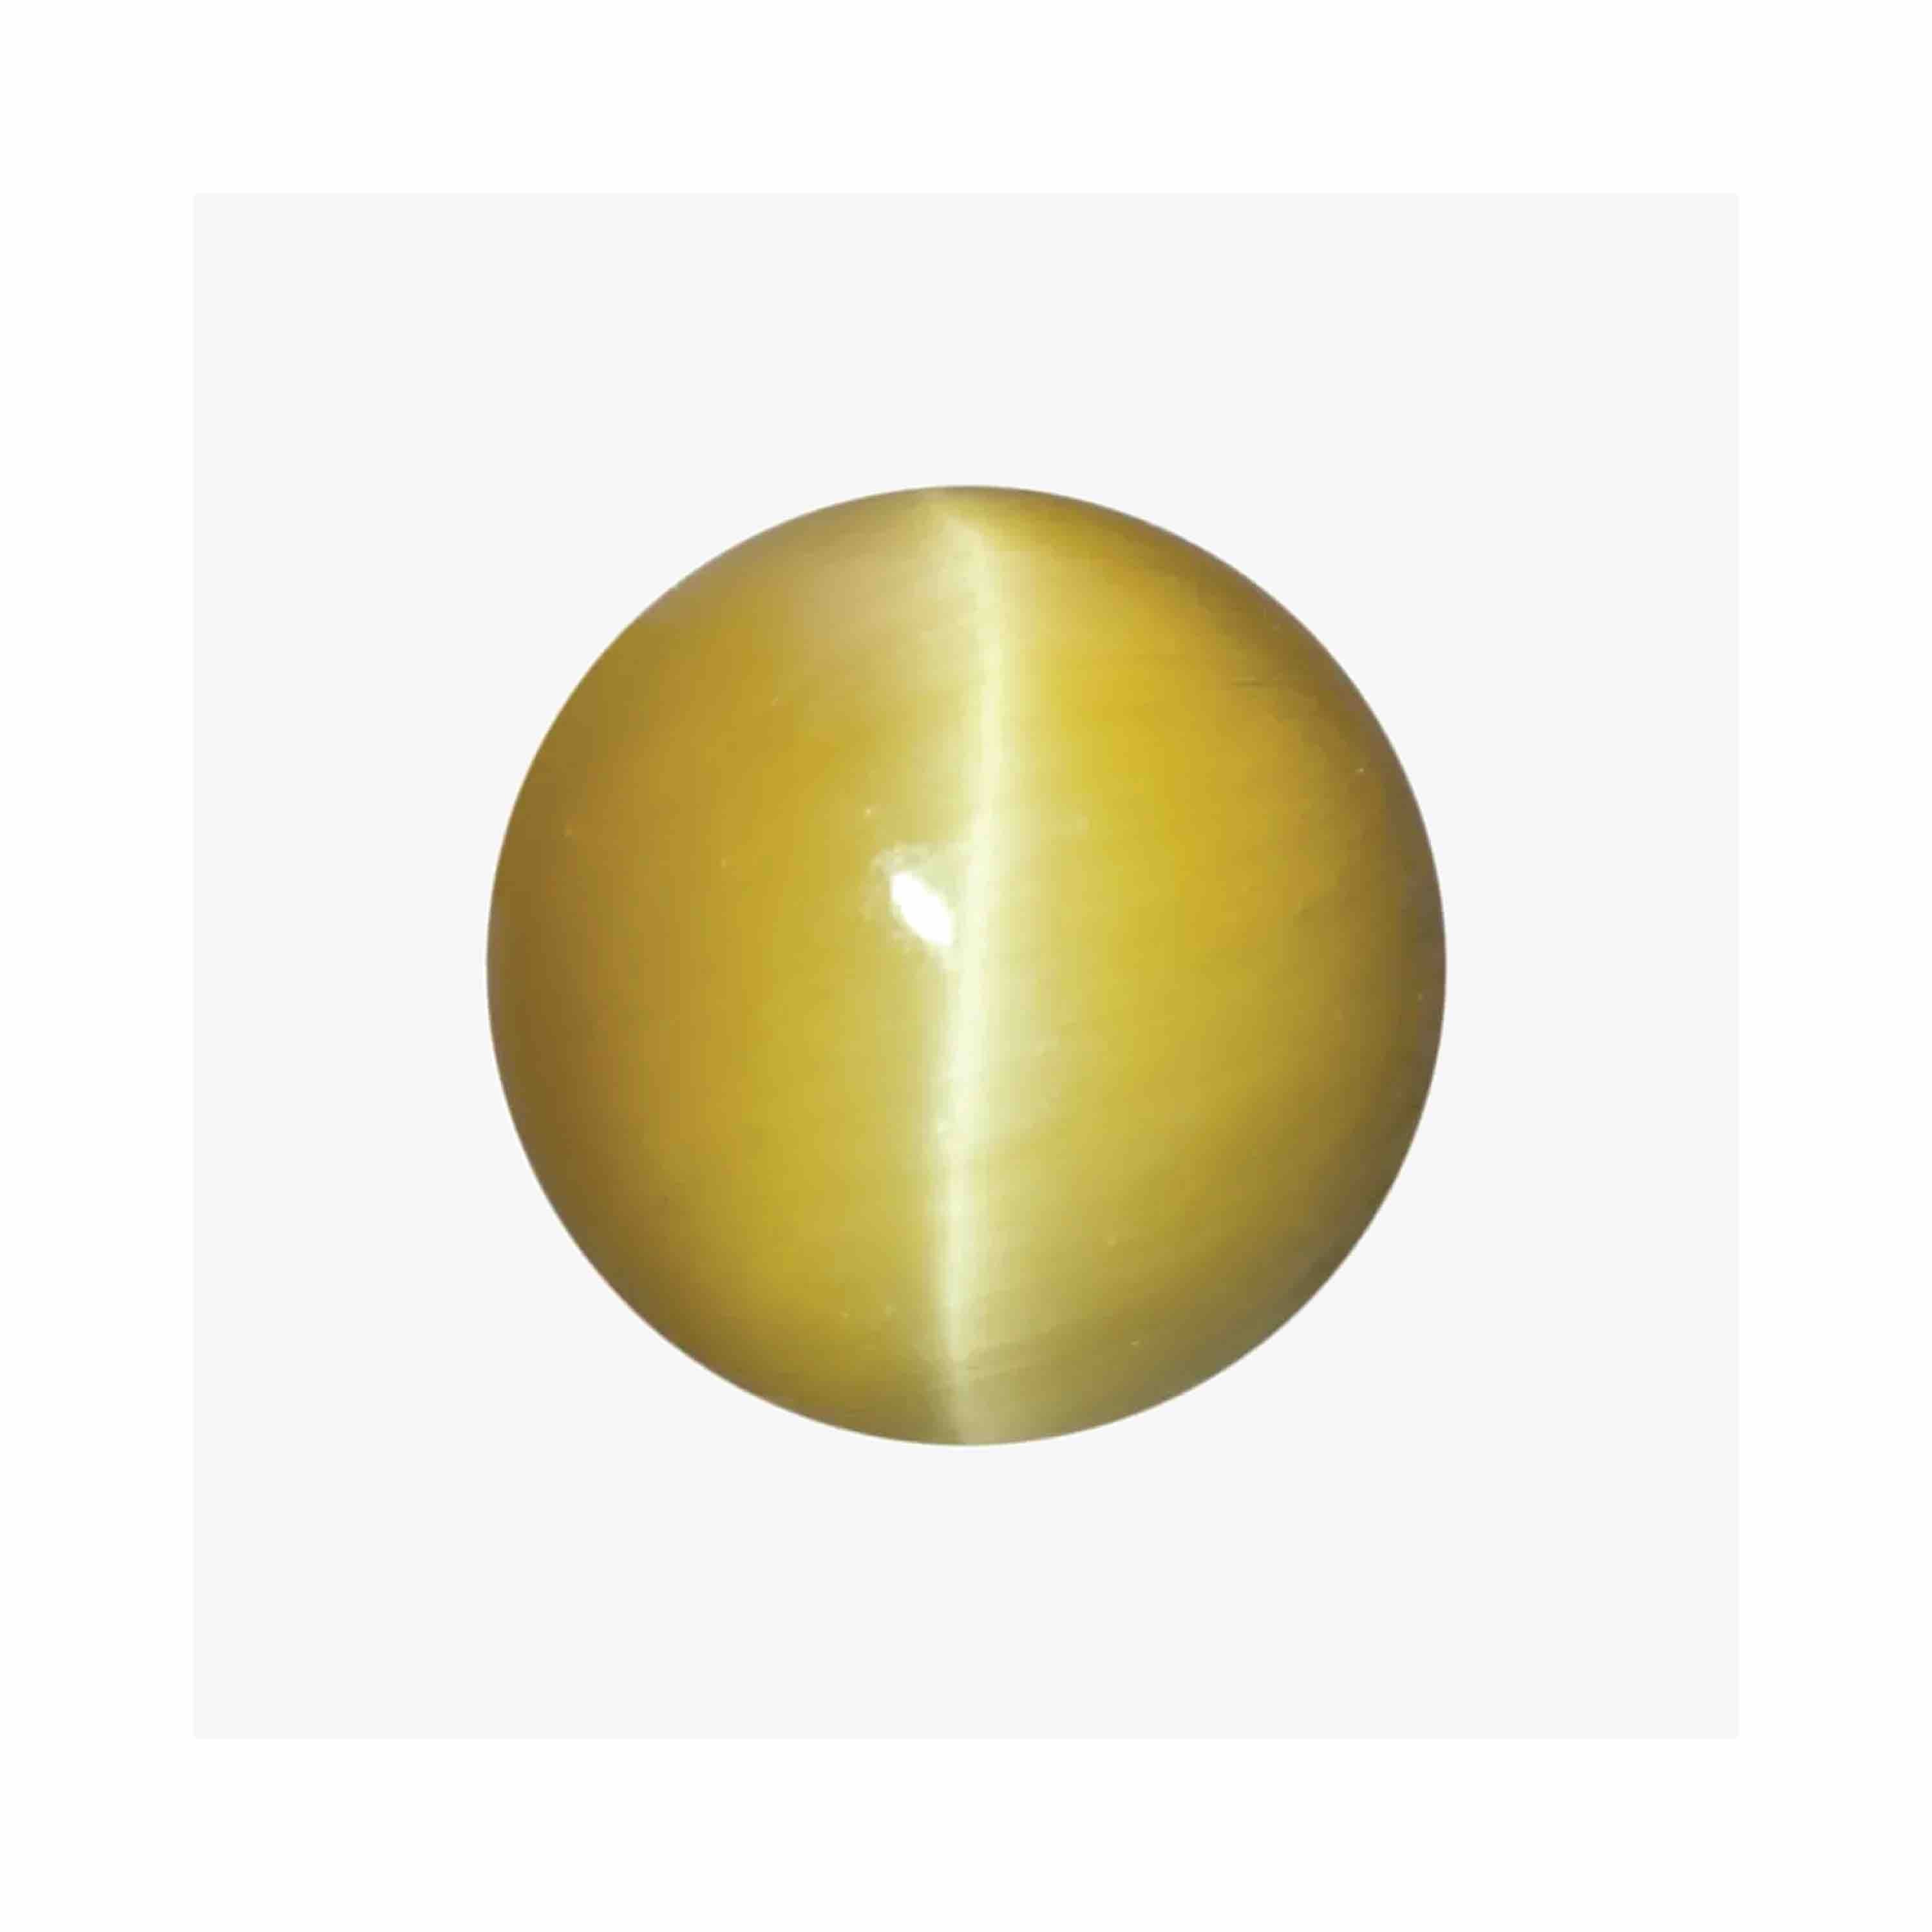 An Overview of the Cat’s Eye Gemstone